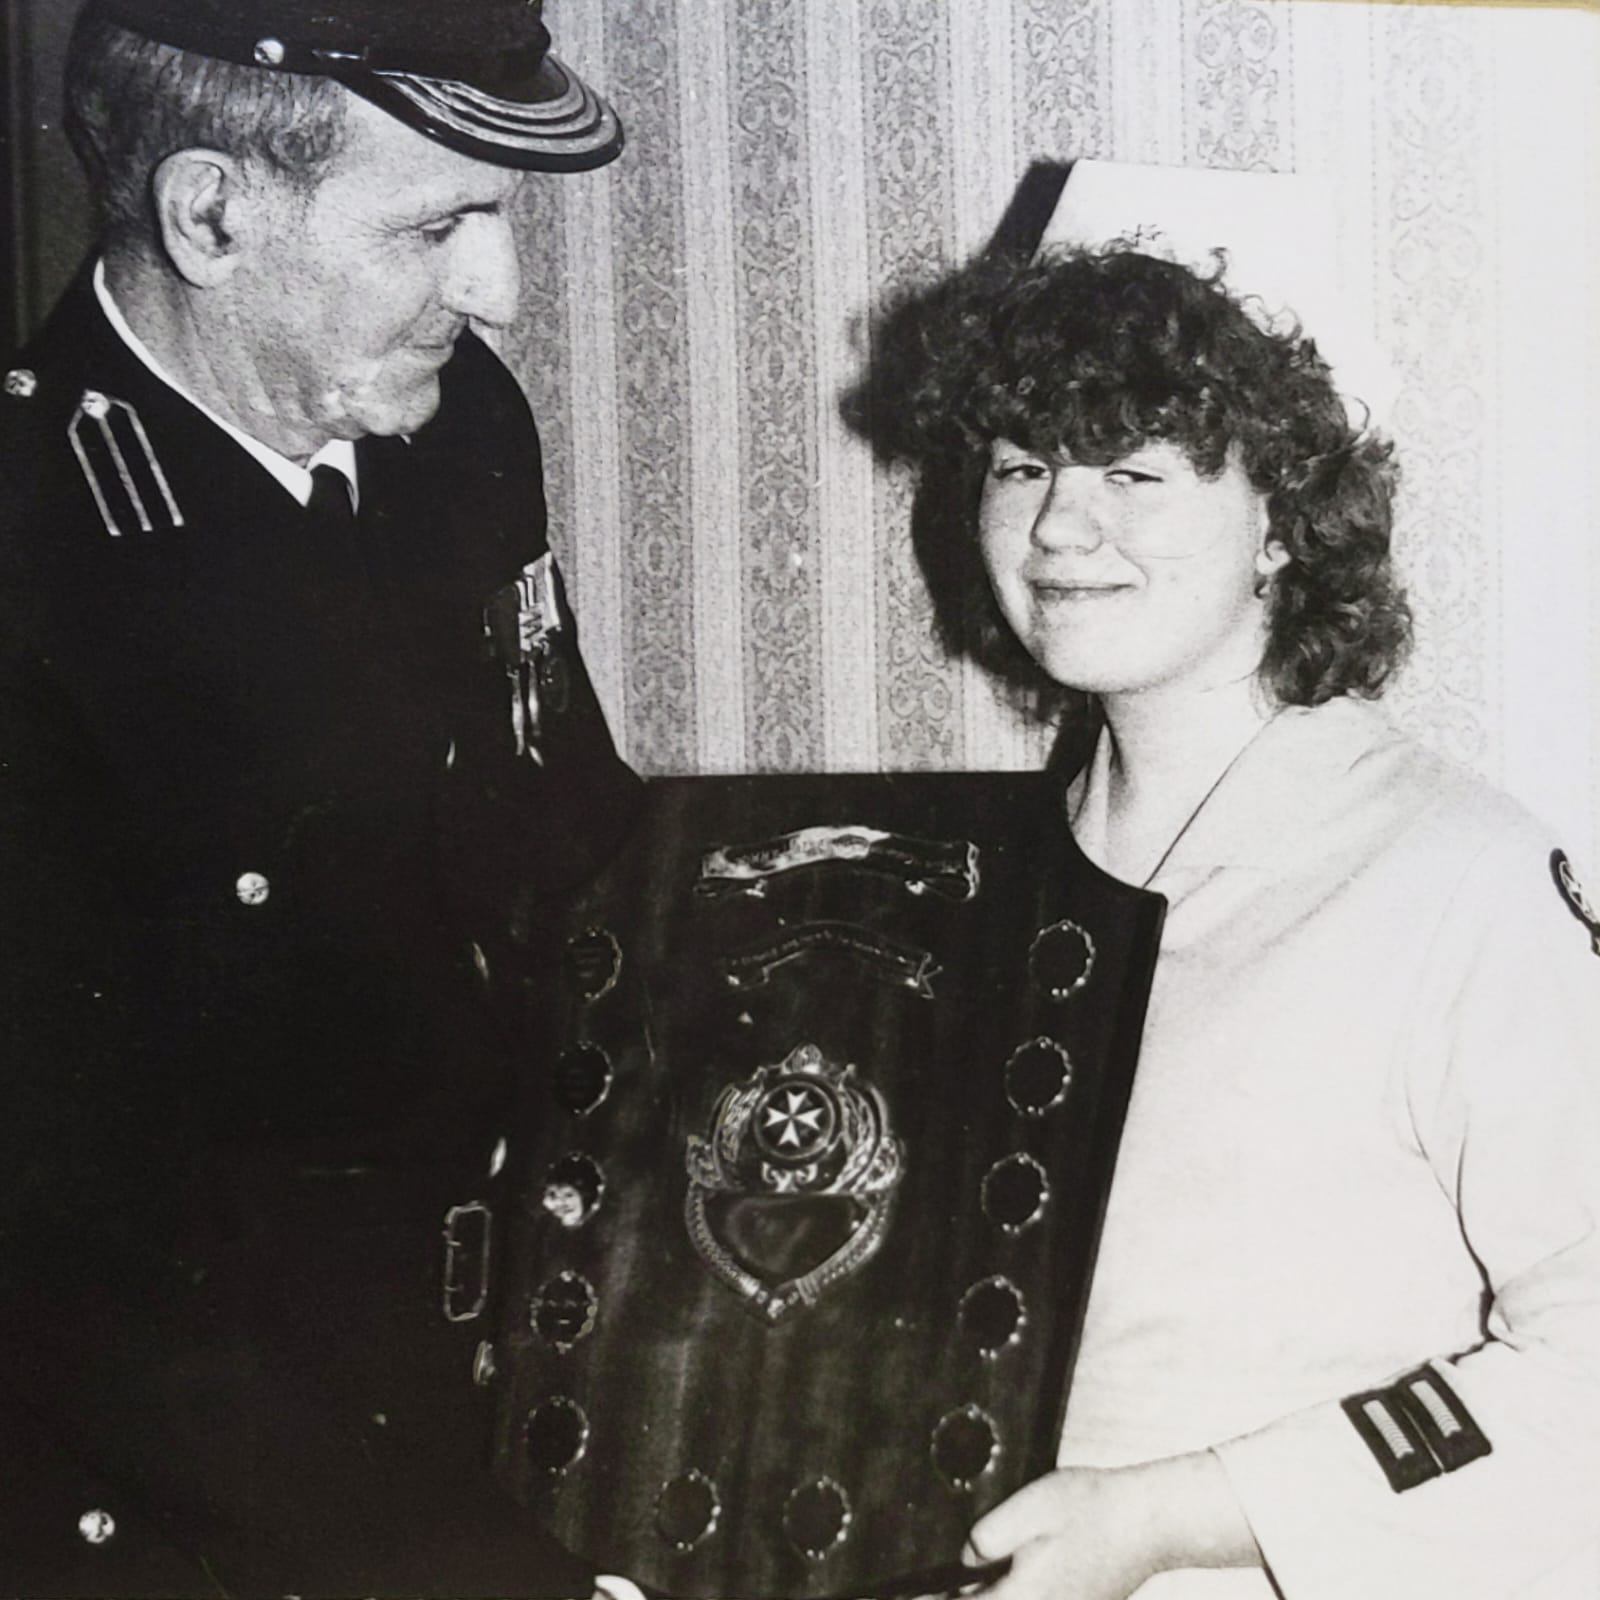 Black and white image of a young female in St John Ambulance uniform standing to the right of an adult male in uniform. The adult is presenting the girl with a large trophy.